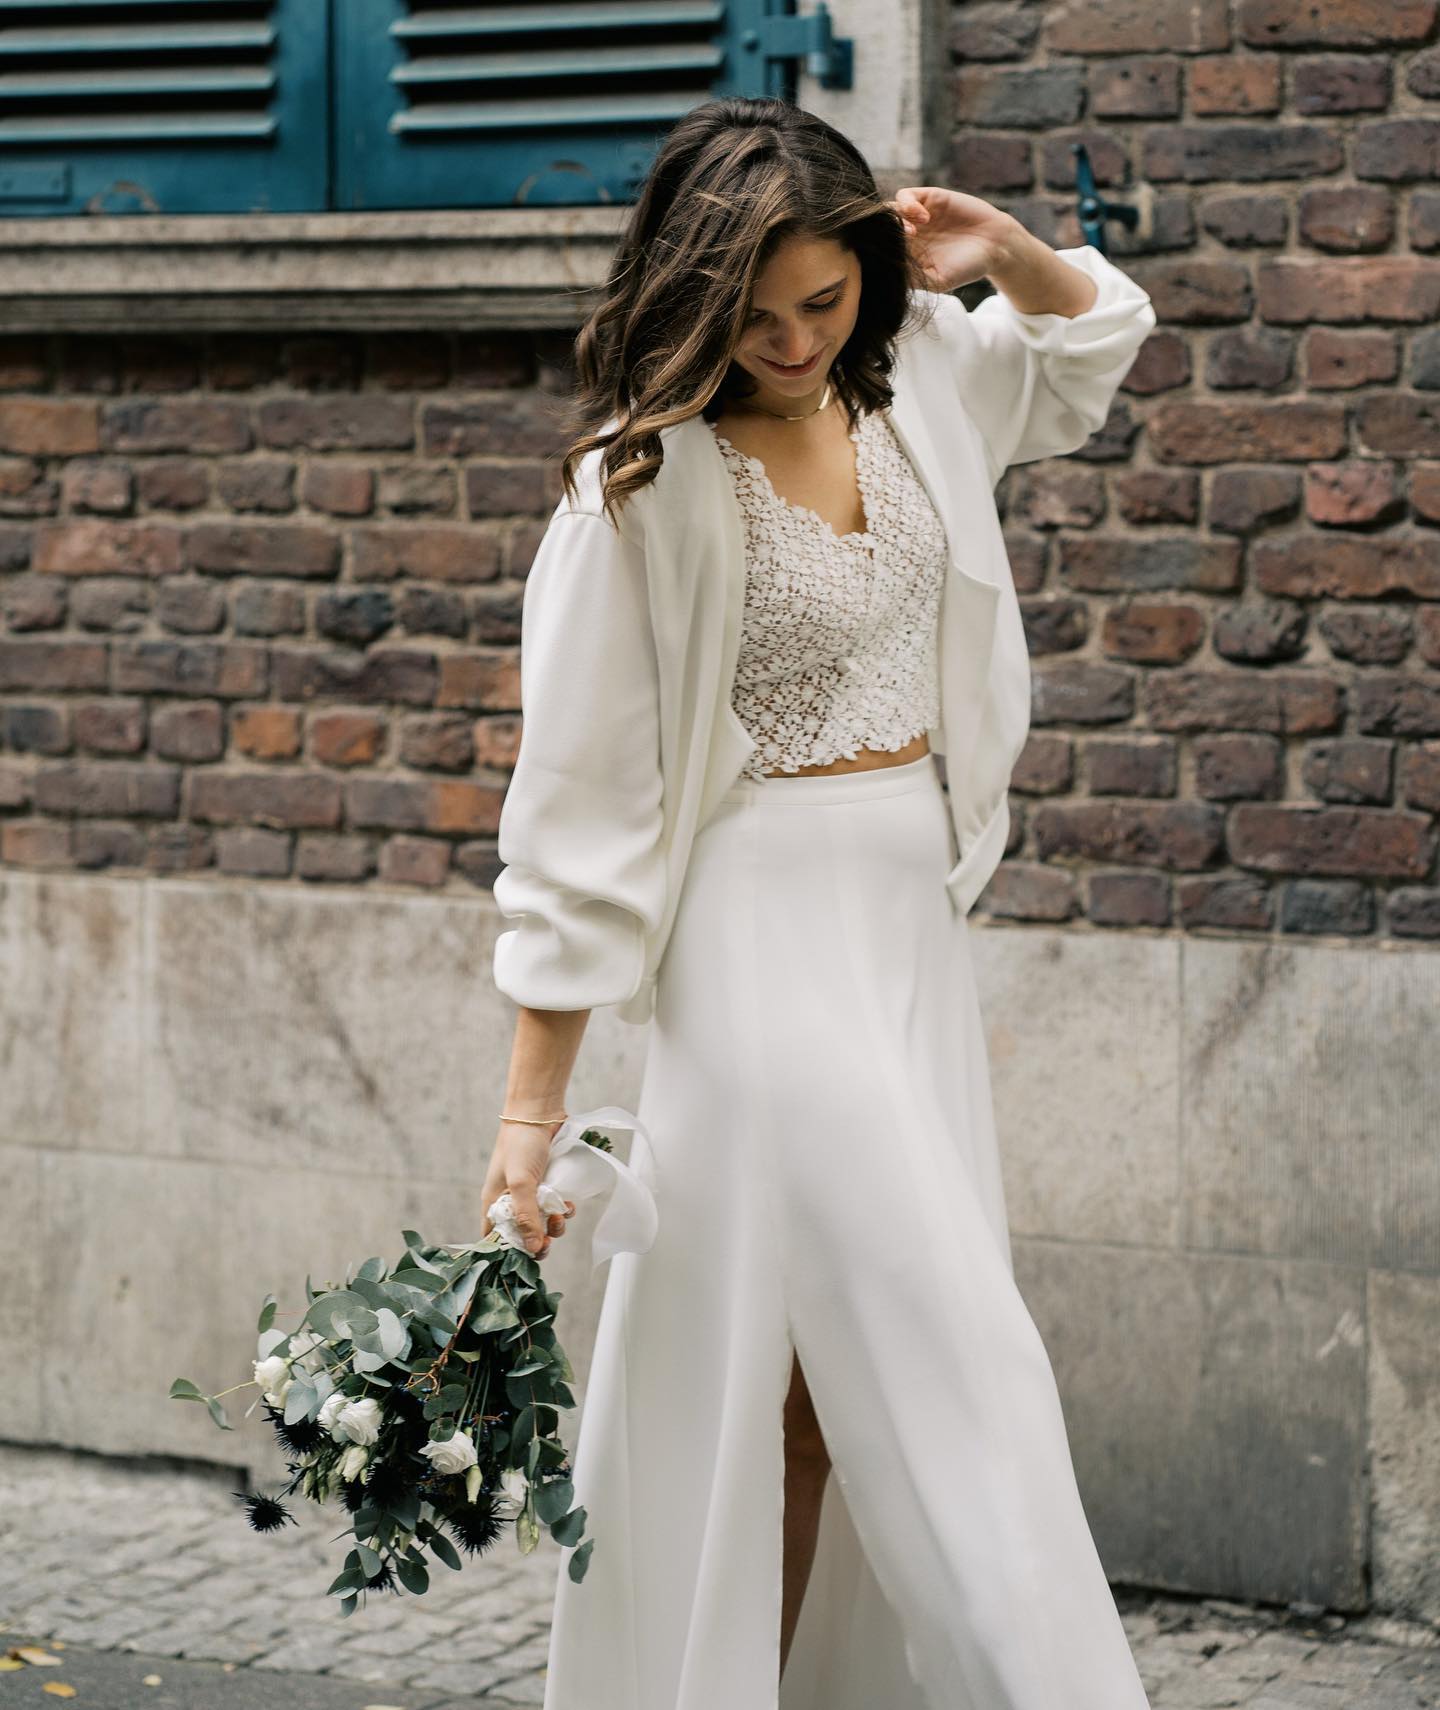 Maxi White Dress and Lace Top with White Cardigan